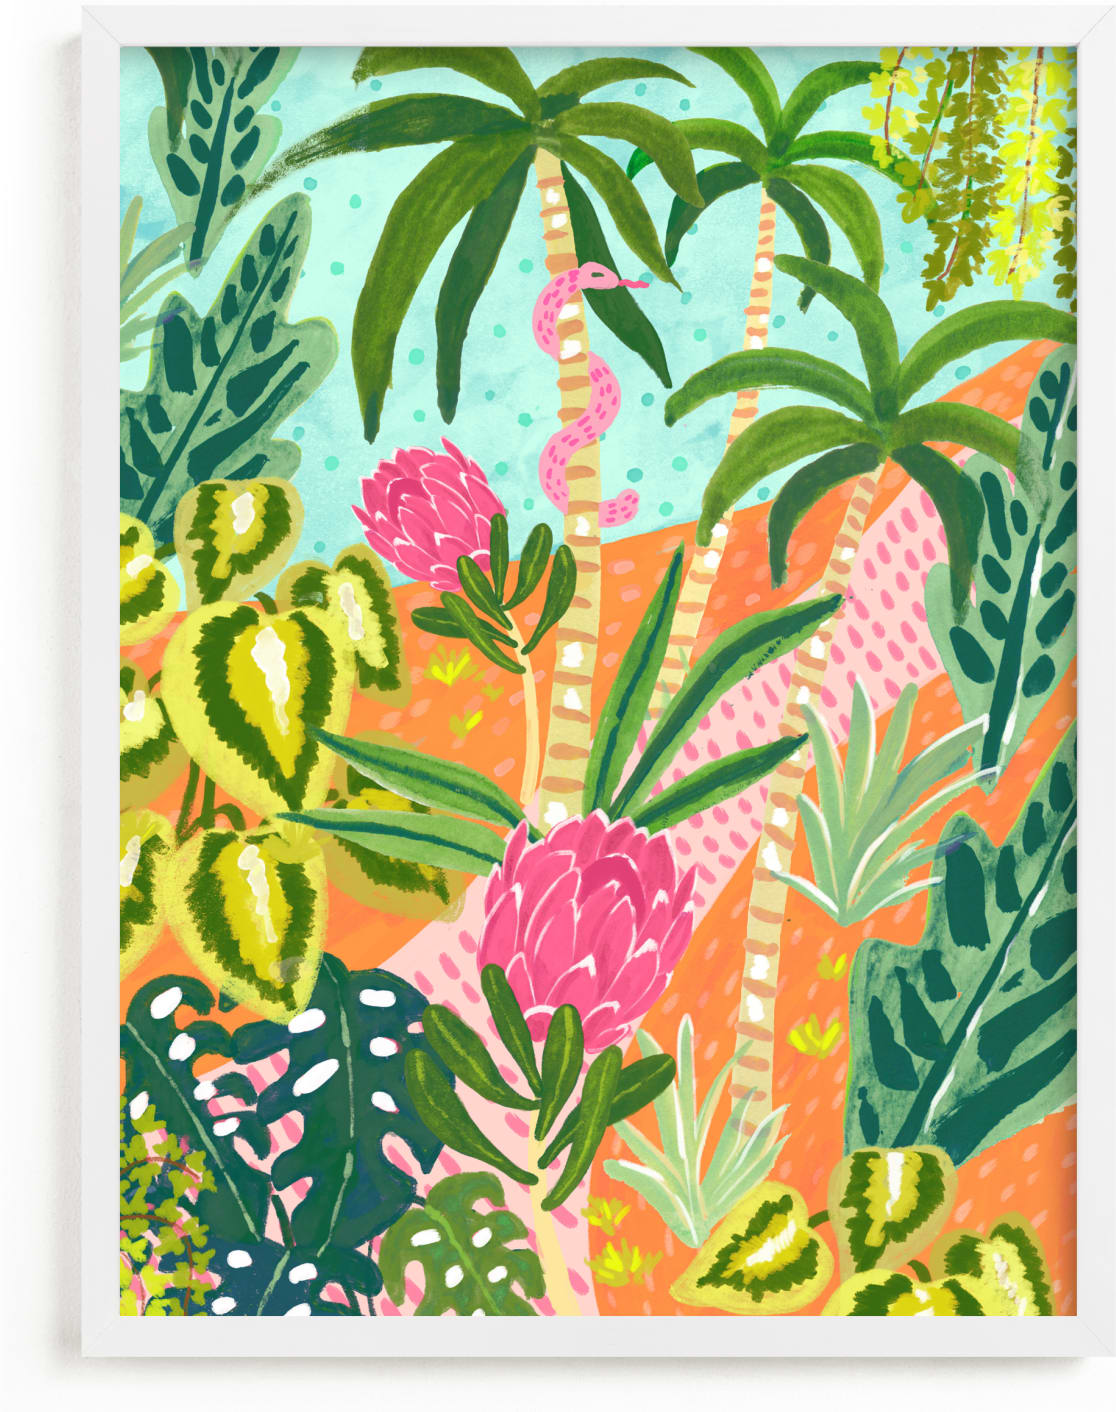 This is a pink kids wall art by Sara Berrenson called Magic Jungle.